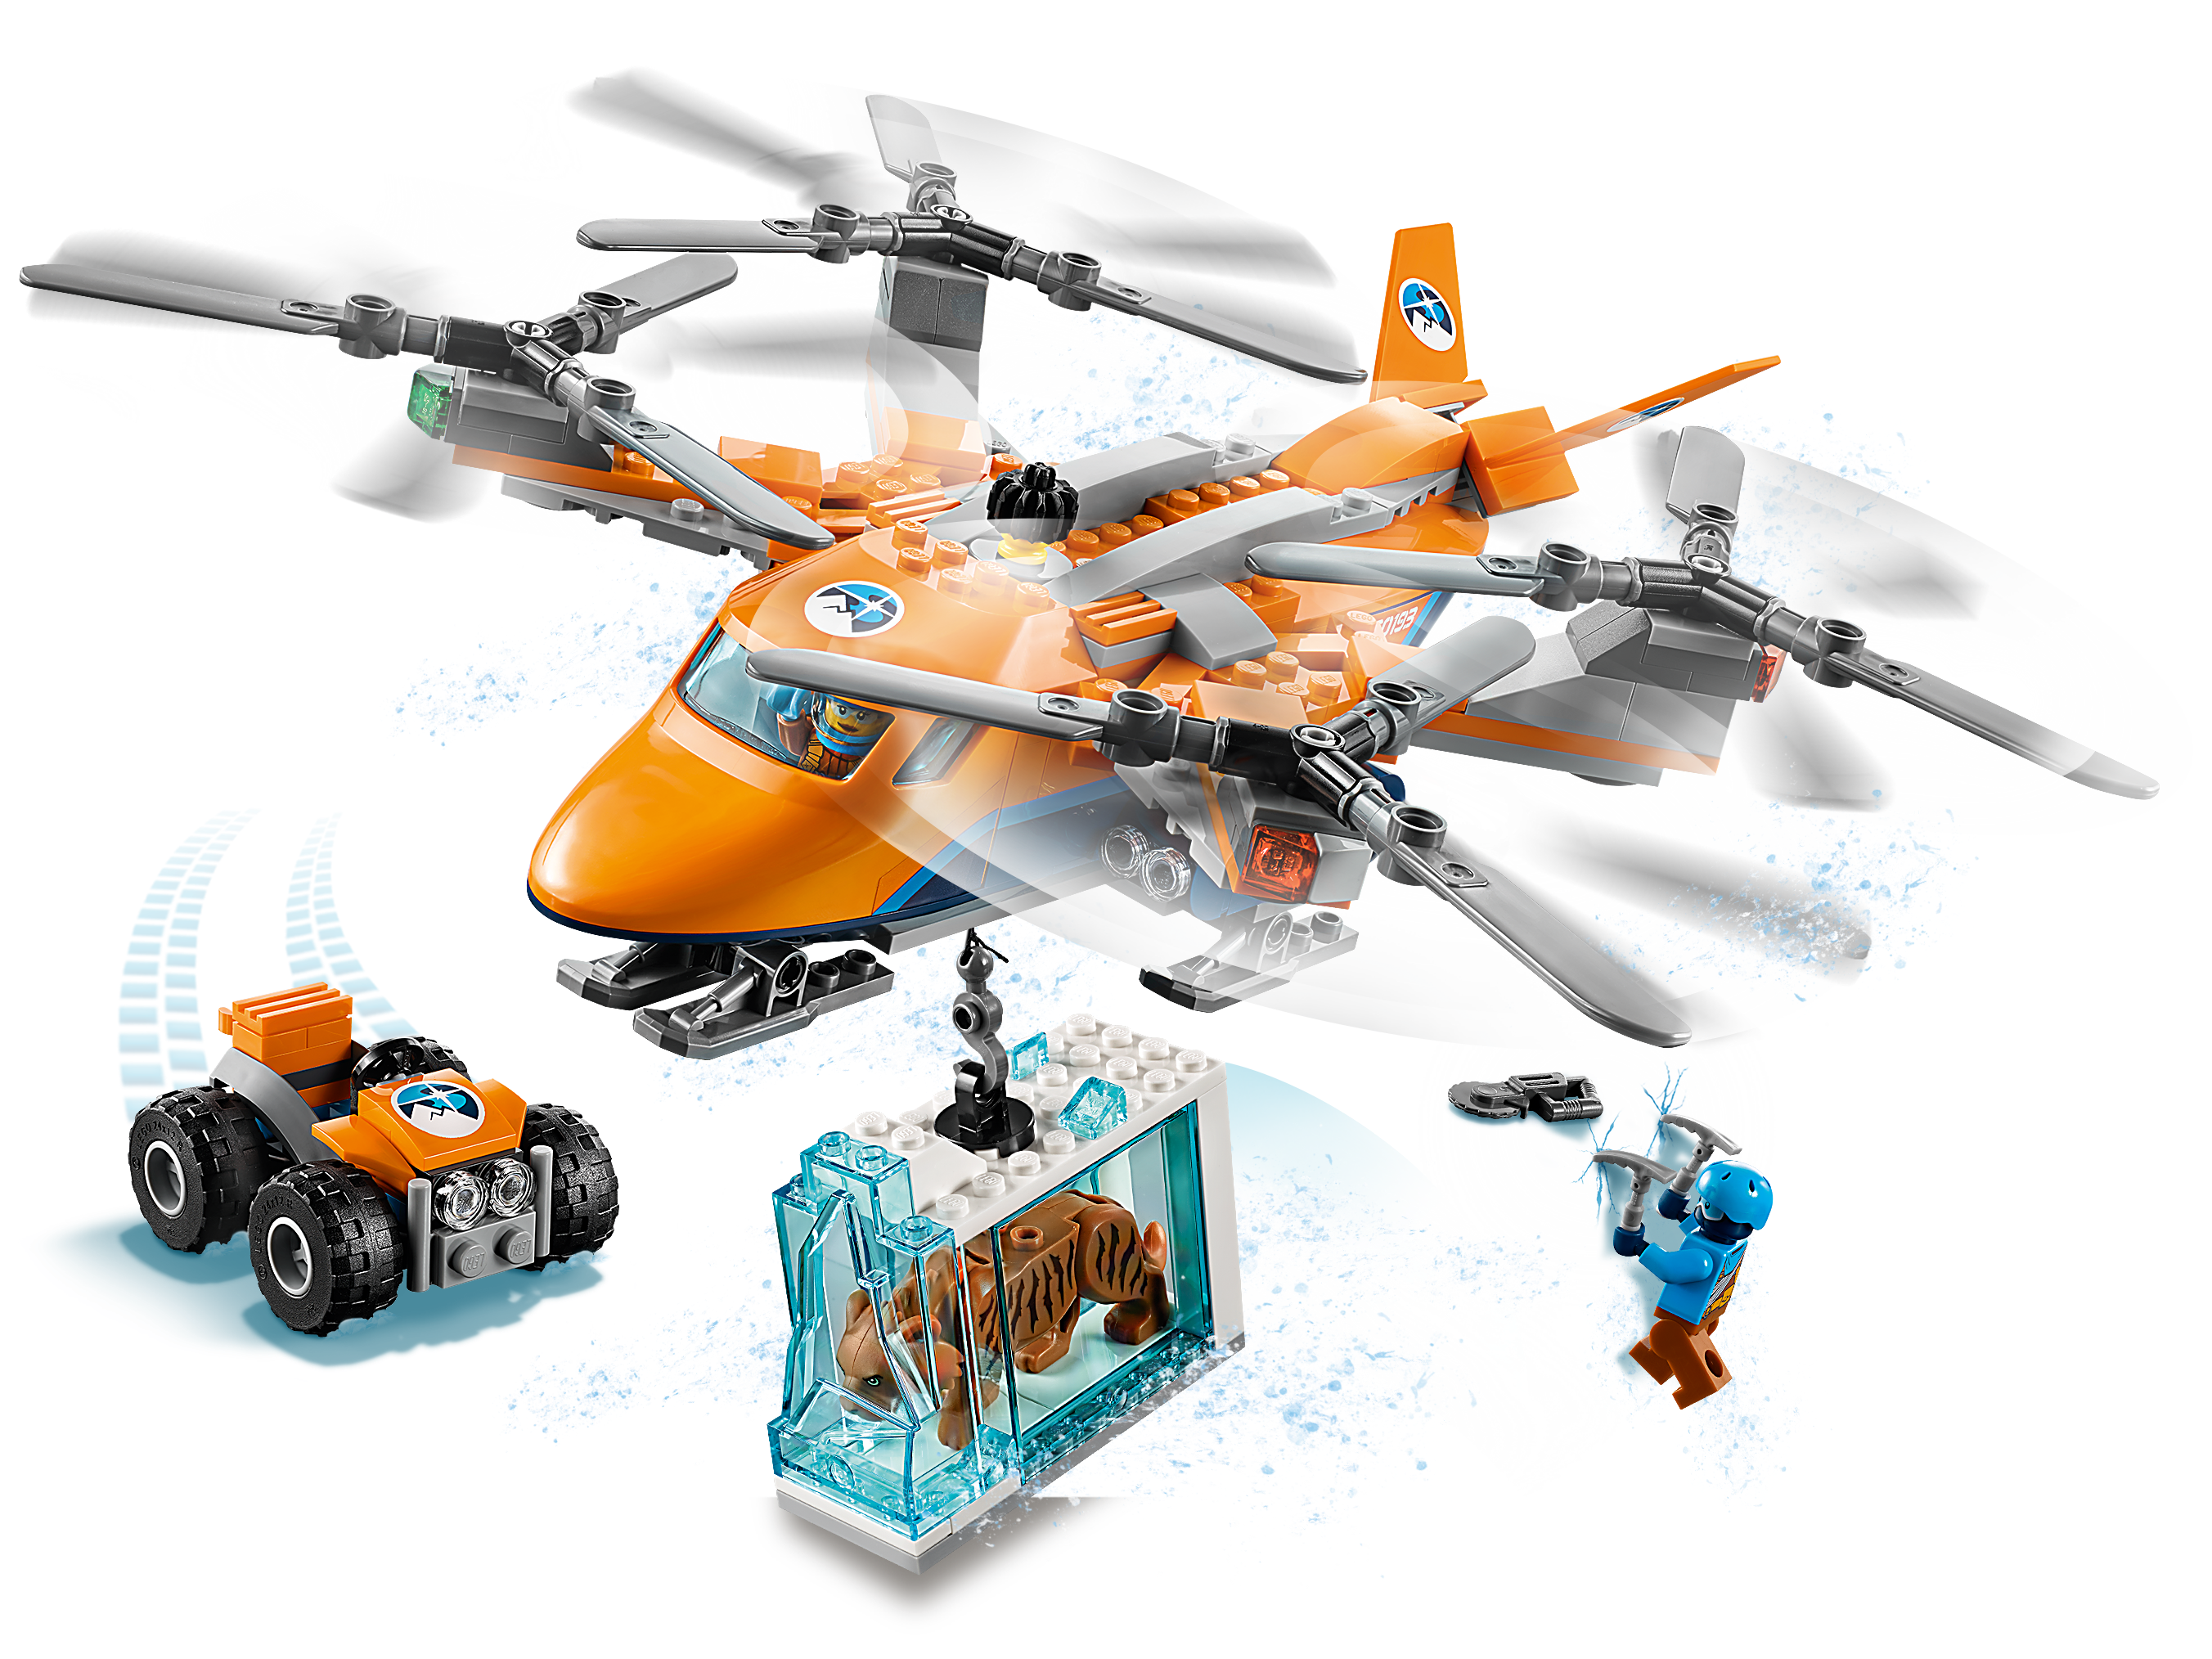 Arctic Air Transport 60193 | Buy online at the Shop US